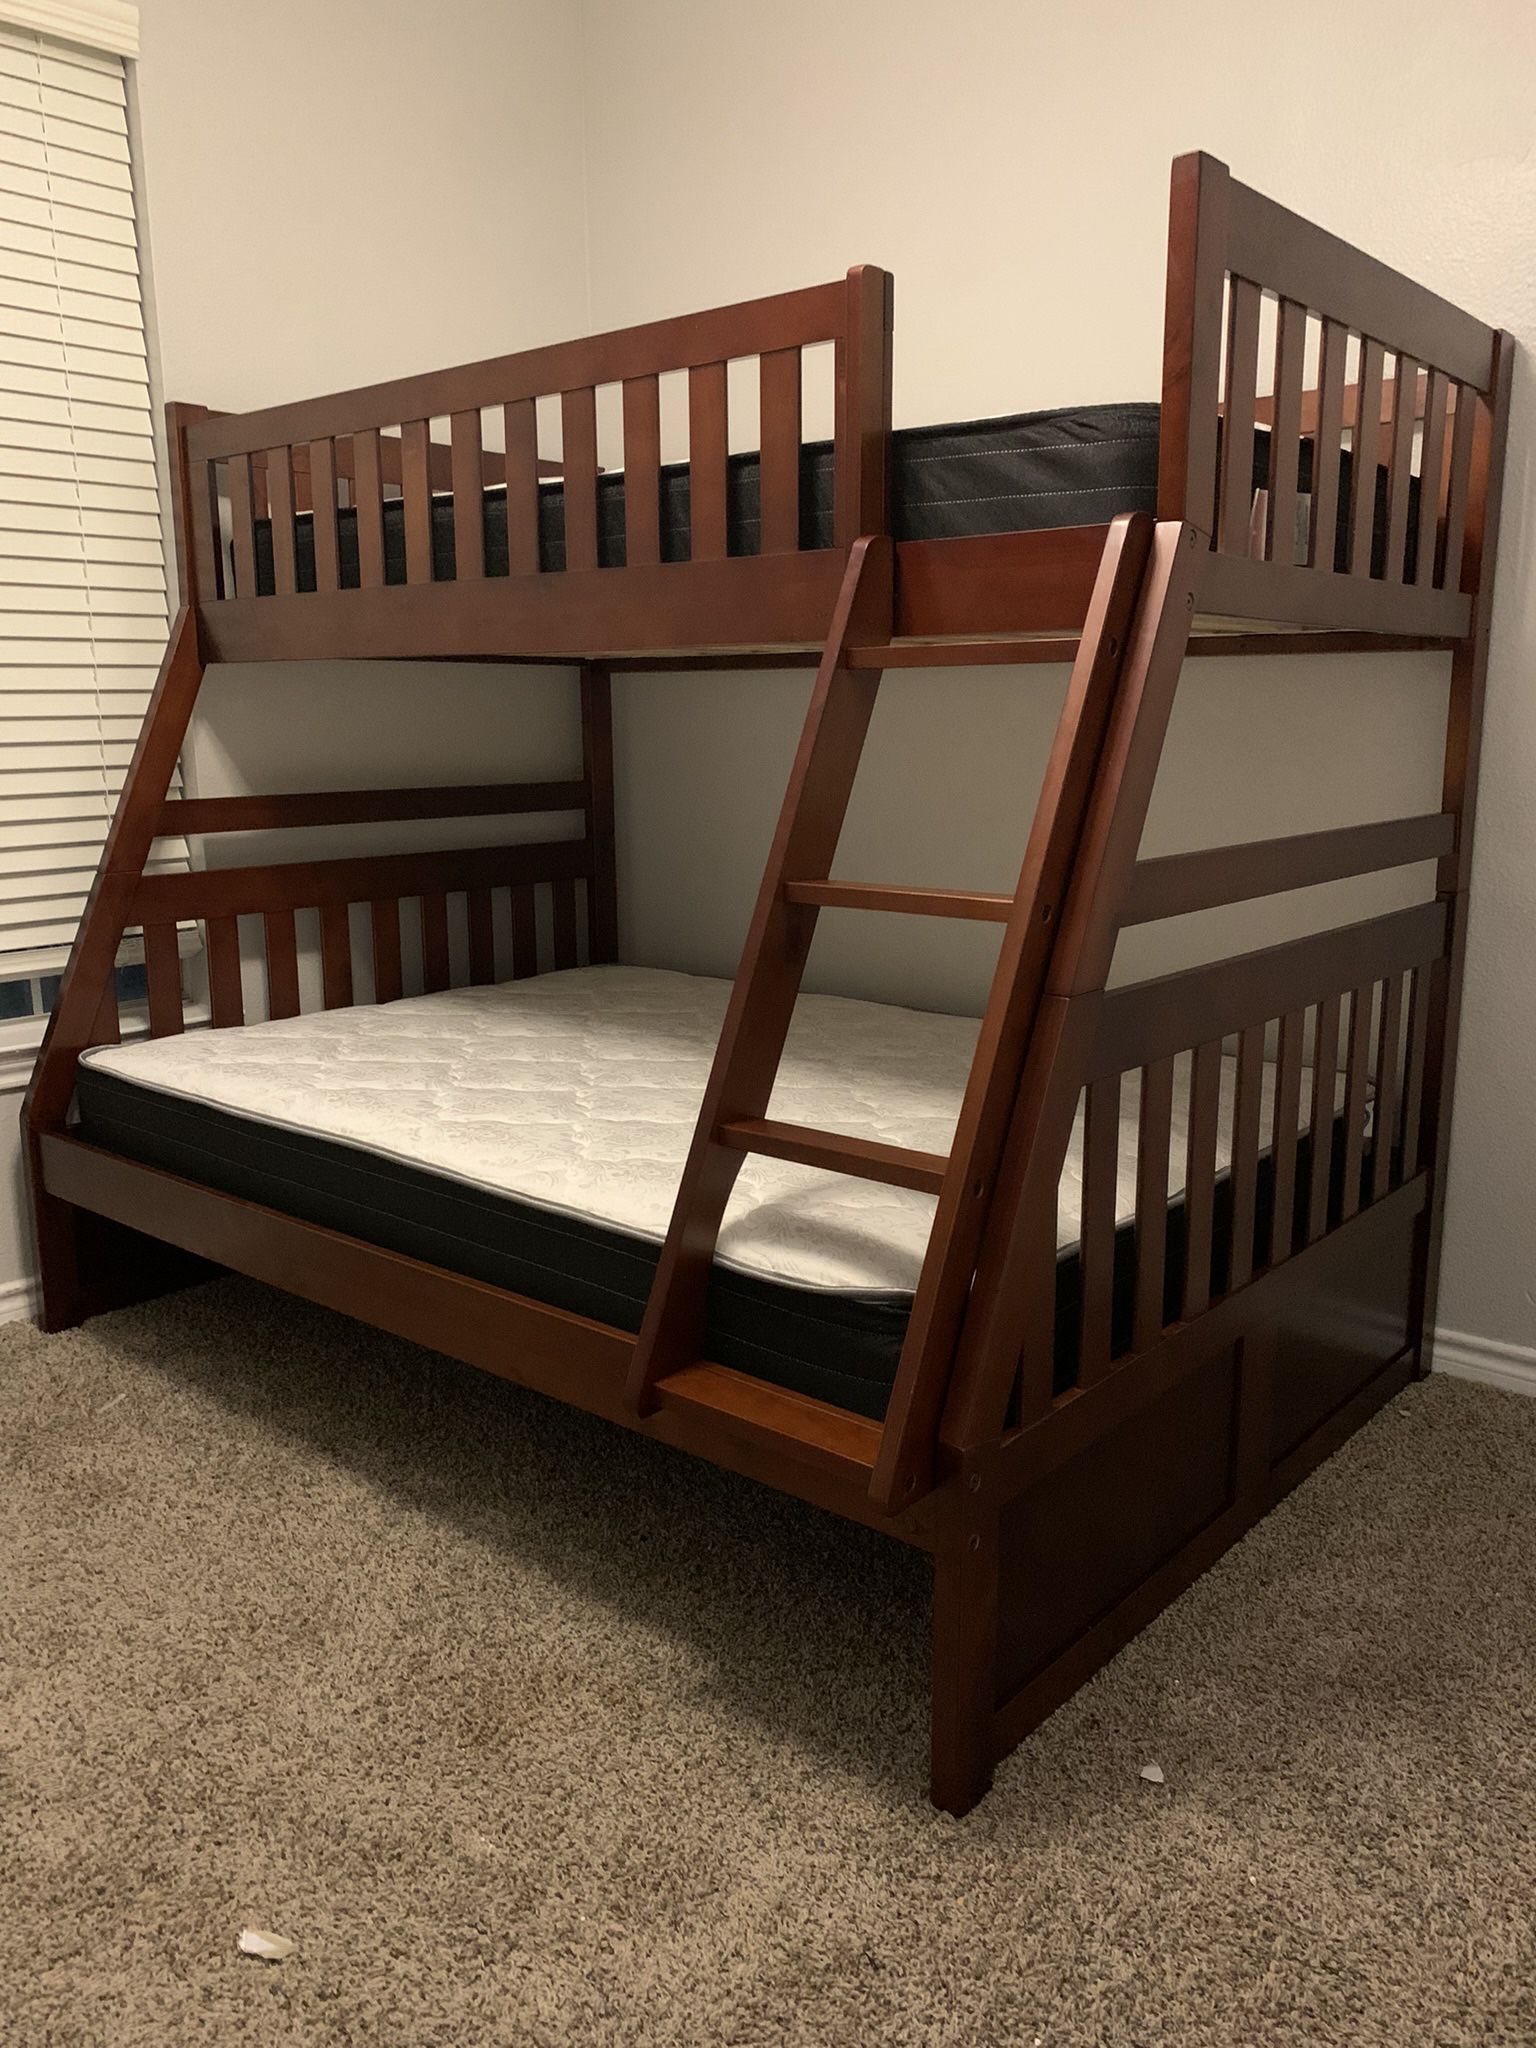 Bunk Beds With Mattress (new)  29 Down